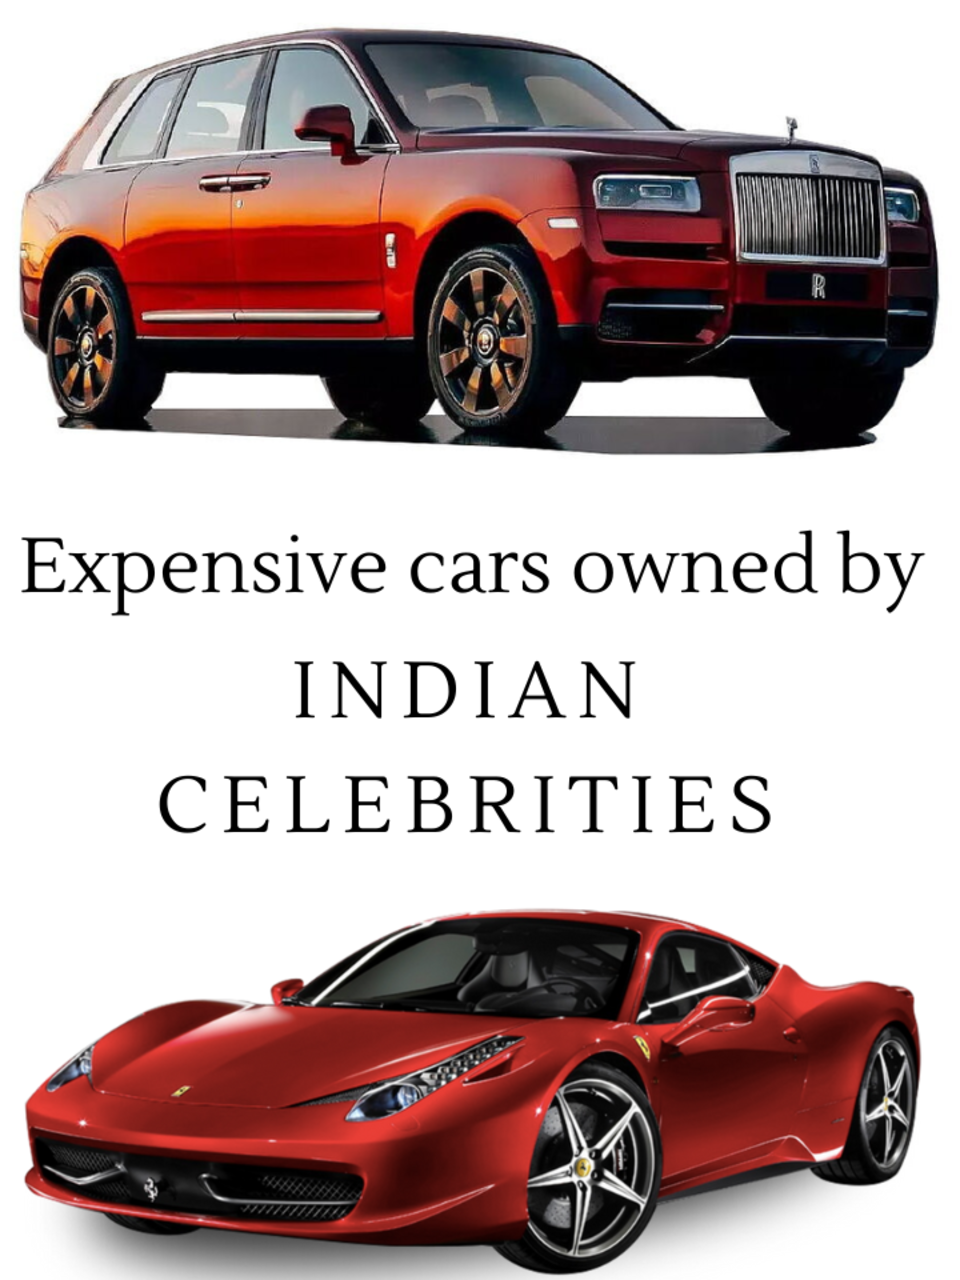 Indian Celebrities And The Most Expensive Items Owned By Them